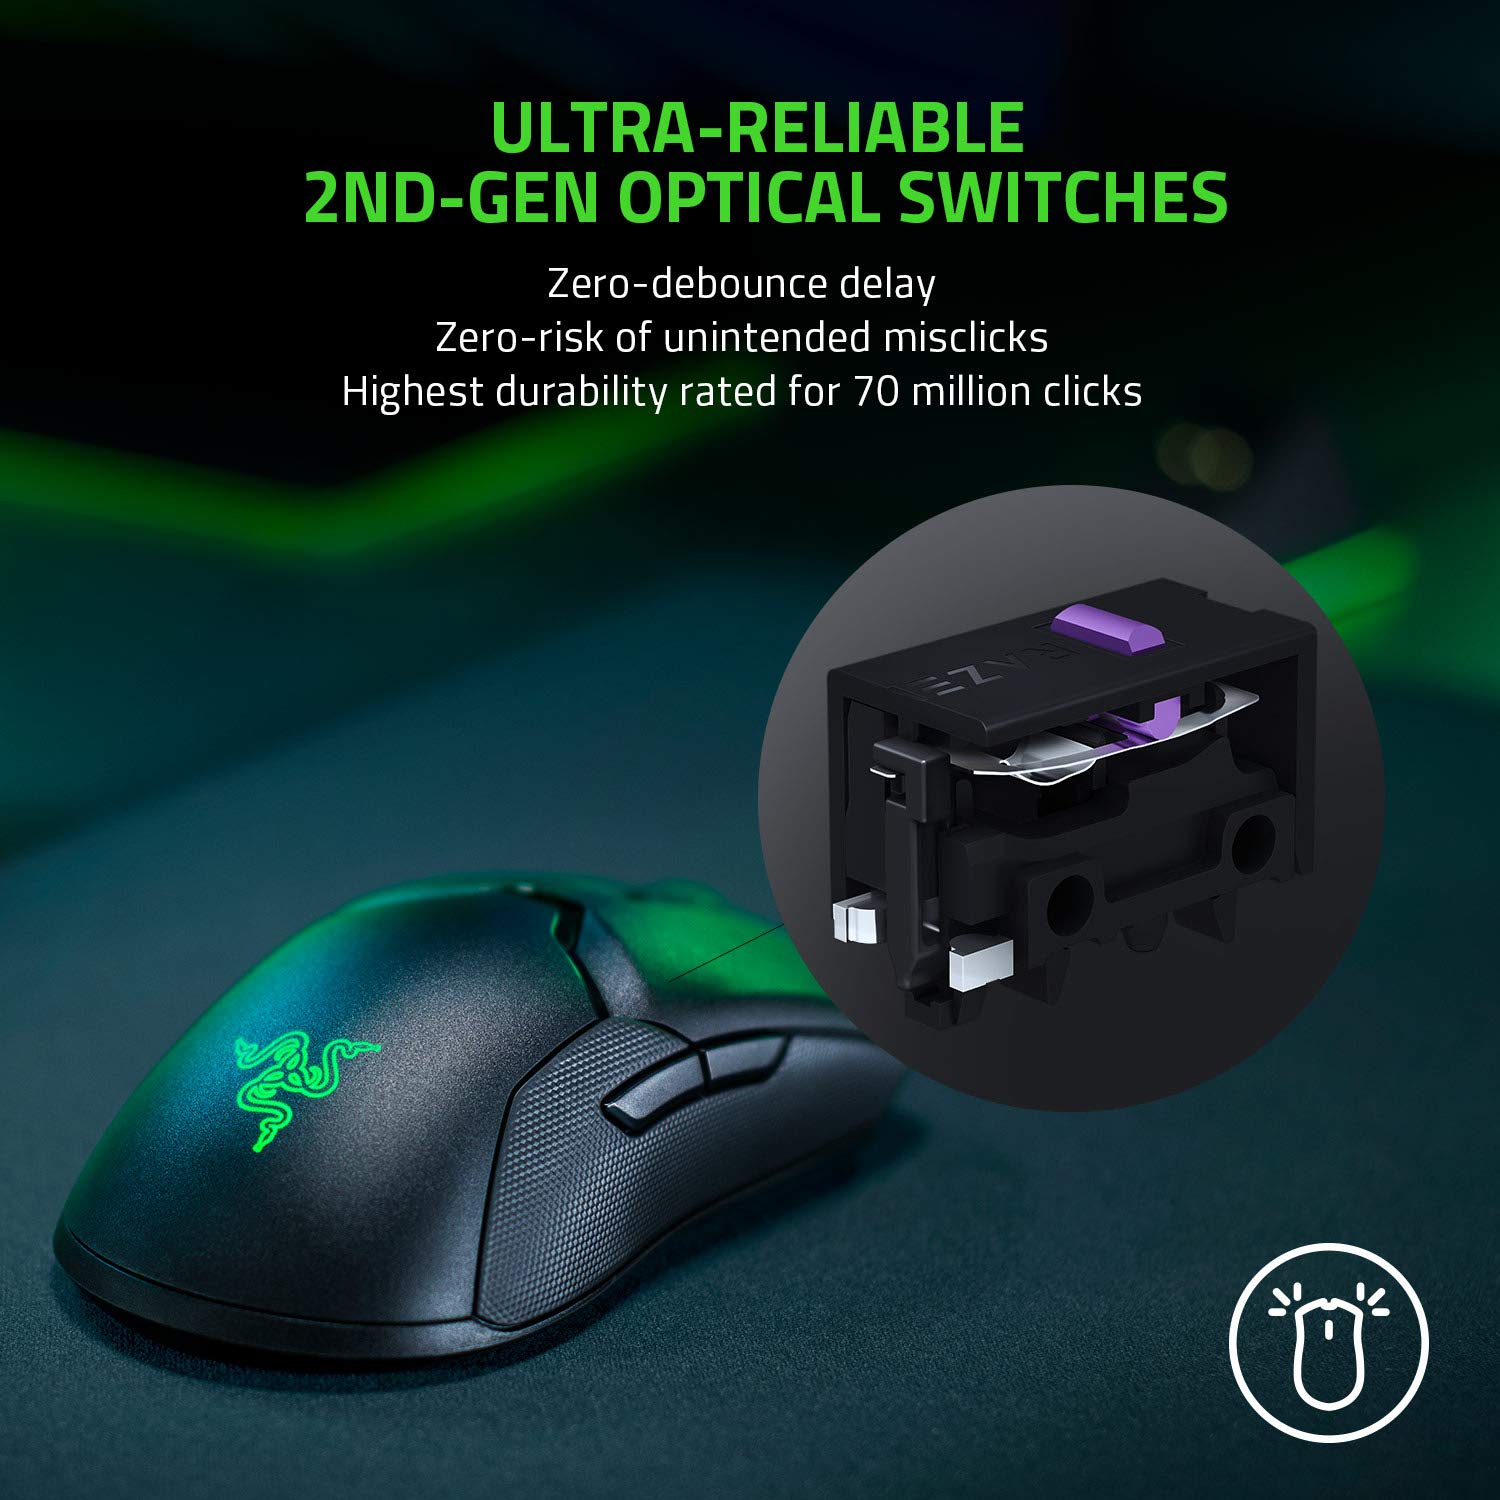 Razer Viper Ultimate Hyperspeed Lightweight Wireless Gaming Mouse & RGB Charging Dock: Fastest Gaming Mouse Switch - 20K DPI Optical Sensor - Chroma Lighting - 8 Programmable Buttons - 70 Hr Battery